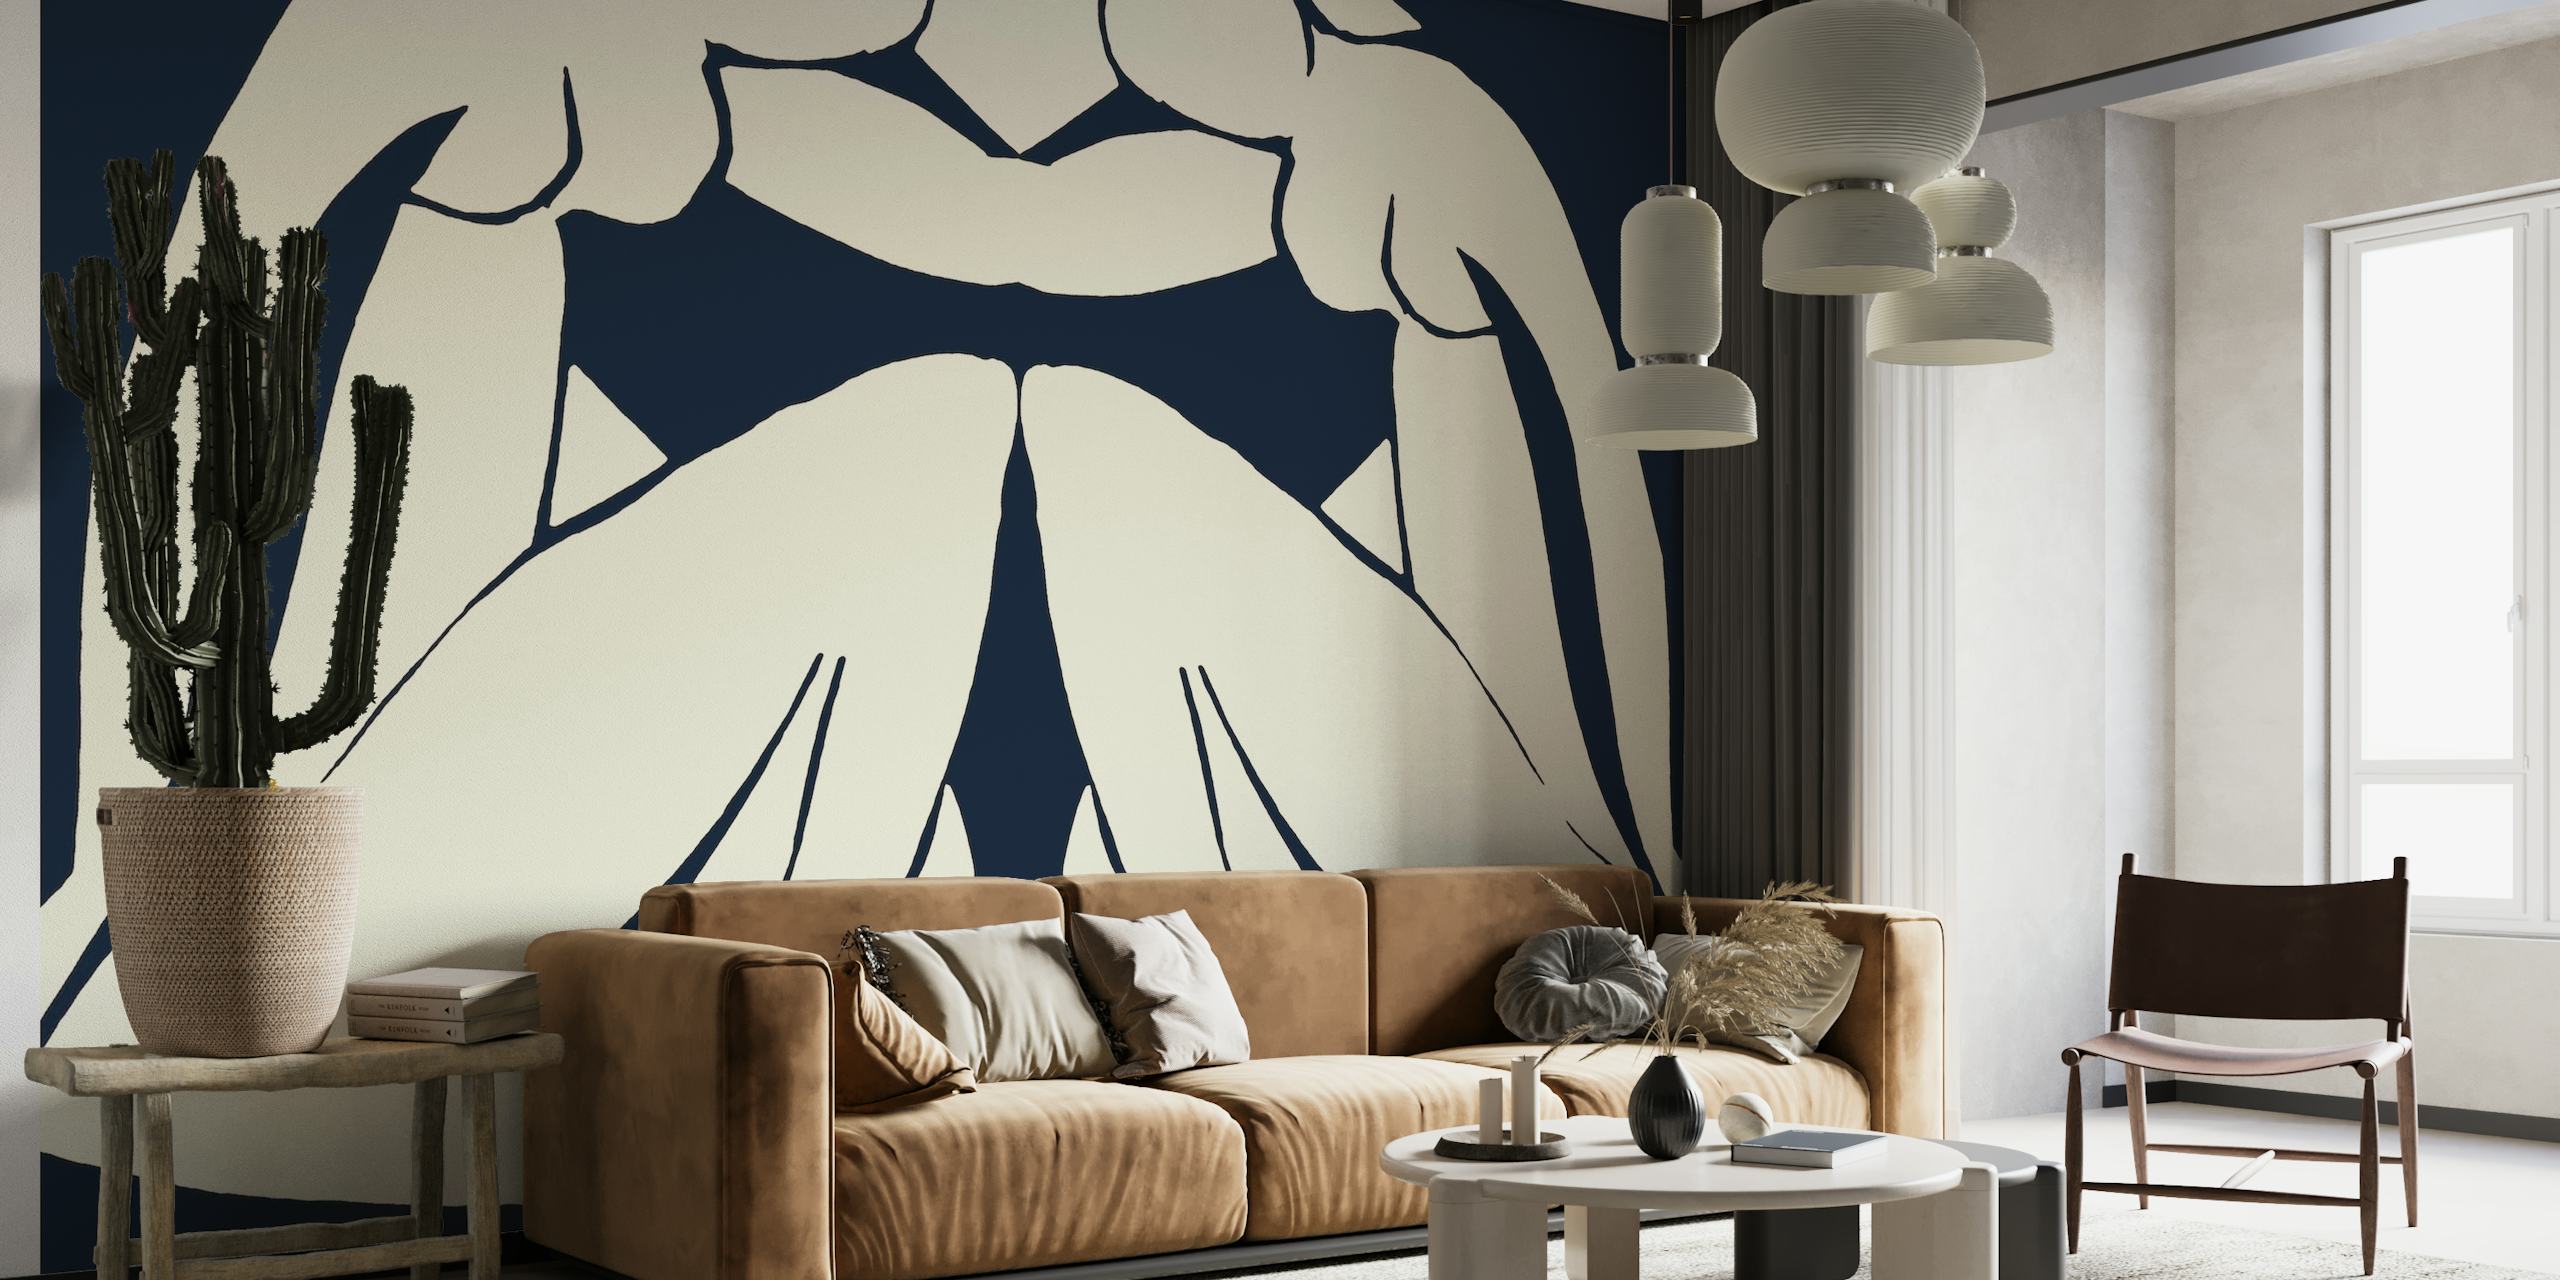 Matisse Sisters abstract silhouette wall mural in navy blue and white